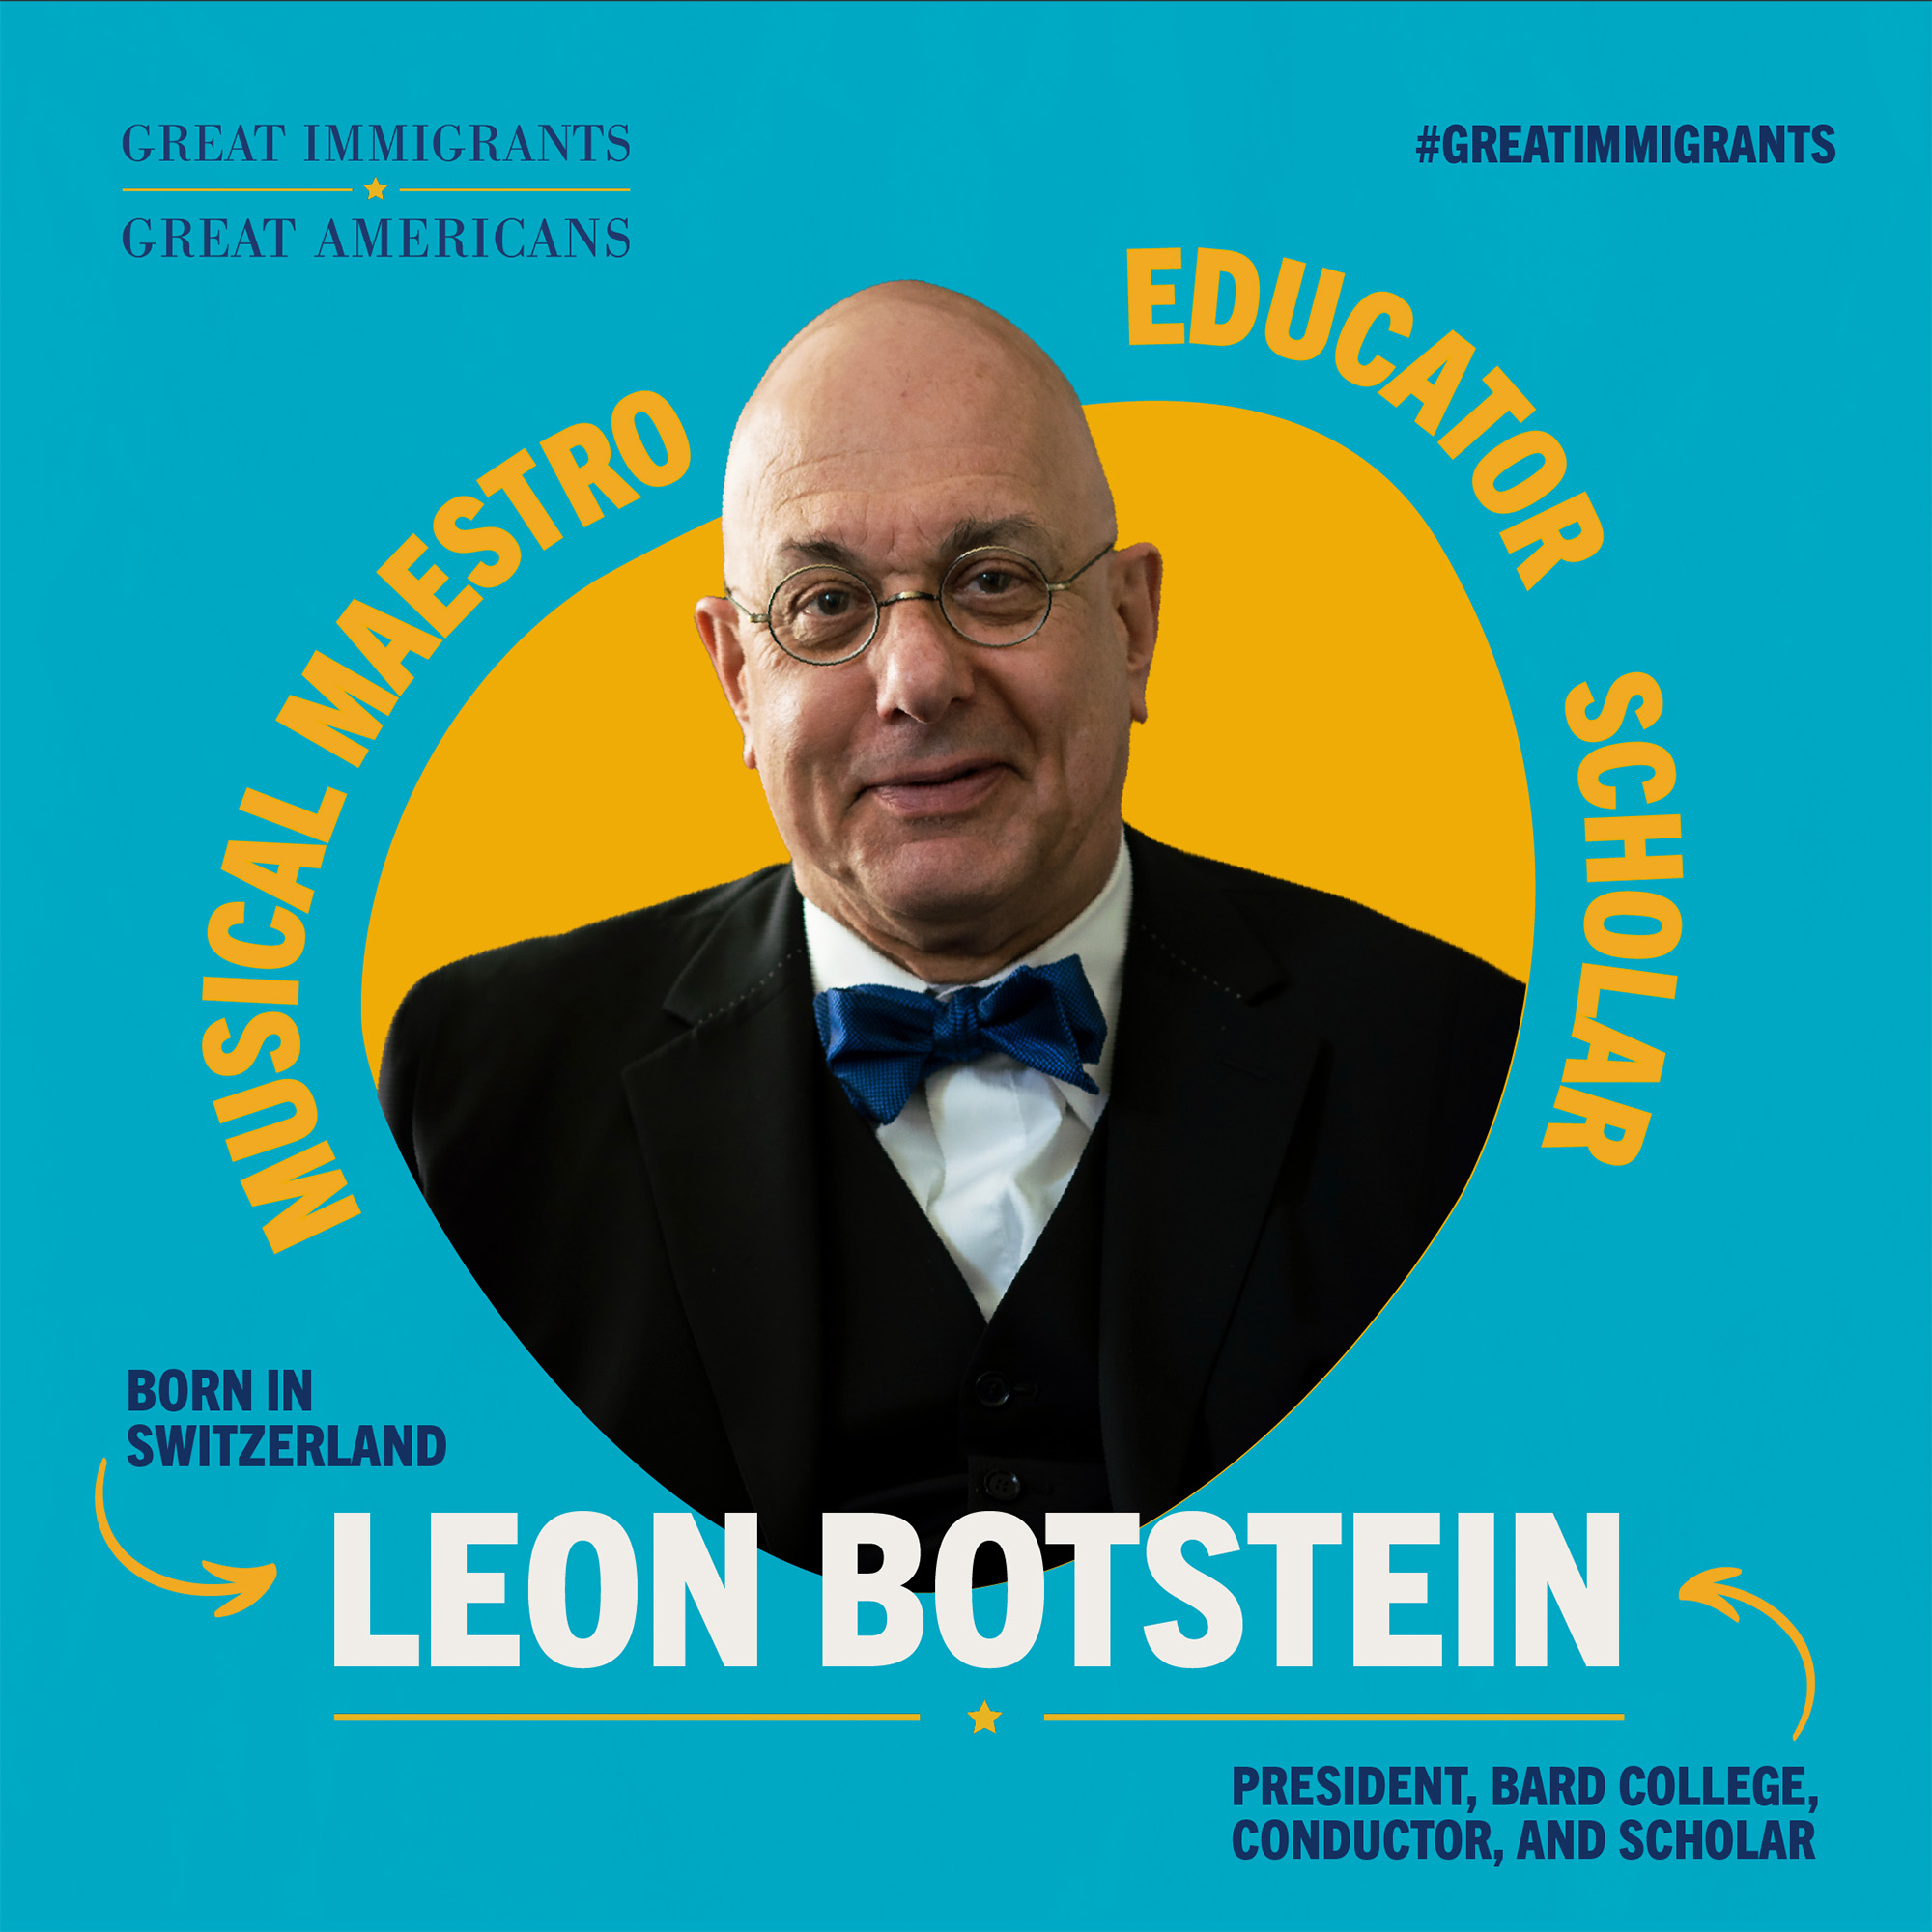 Bard College President Leon Botstein. Graphic courtesy the Carnegie Corporation; Visit https://www.carnegie.org/awards/great-immigrants/2024-great-immigrants/